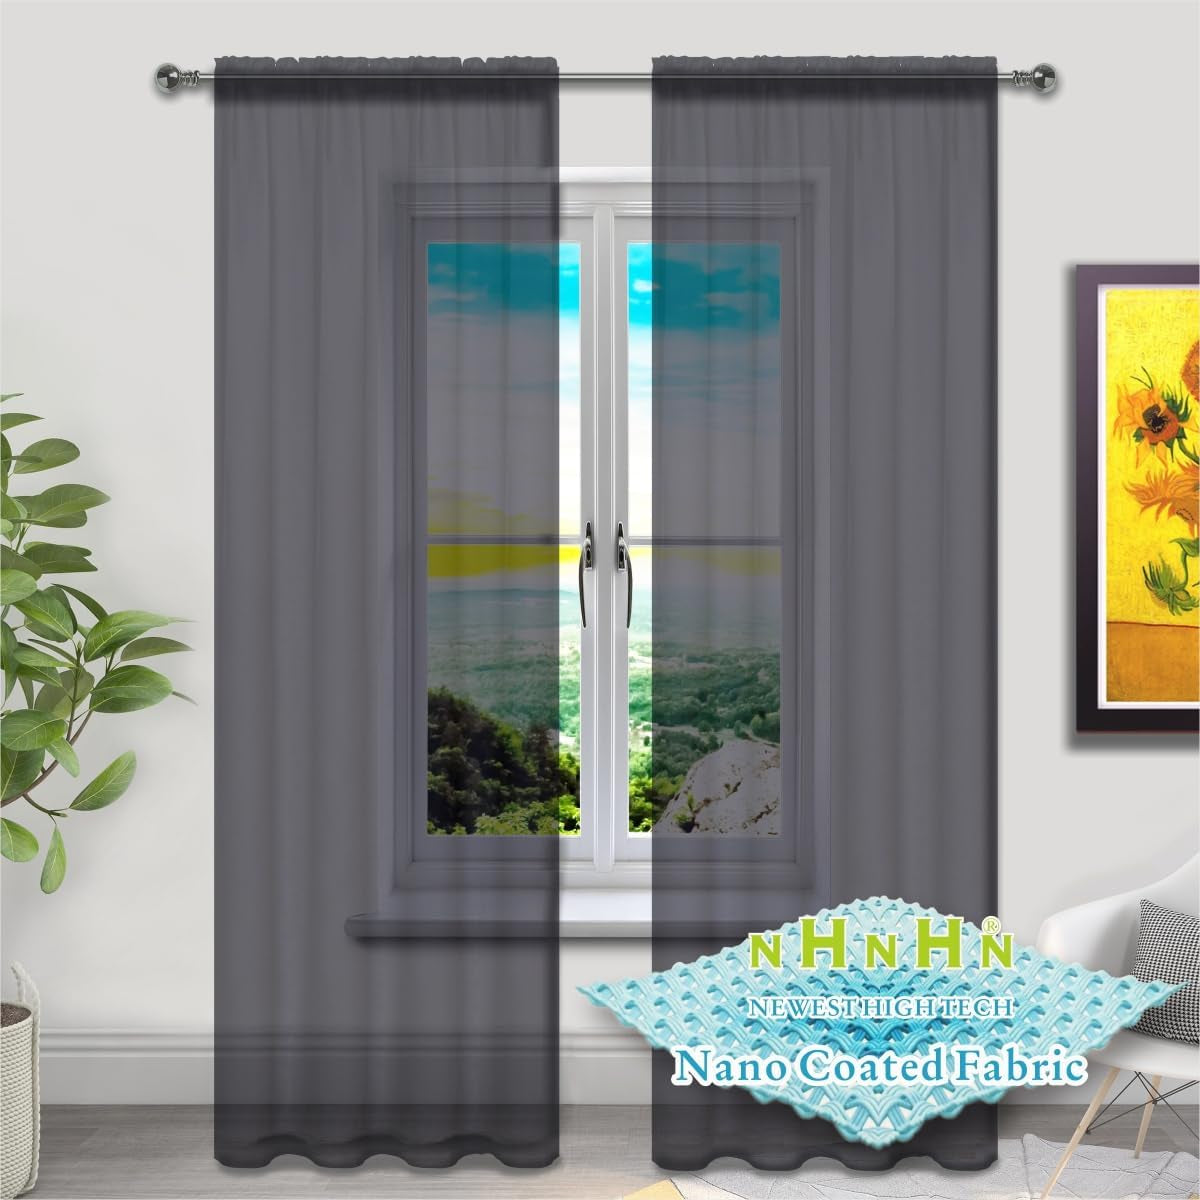 NHNHN Nano Material Coated White Sheer Curtains 84 Inches Long, Rod Pocket Window Drapes Voile Sheer Curtain 2 Panels for Living Room Bedroom Kitchen (White, W52 X L84)  NHNHN Black 52W X 72L | 2 Panels 